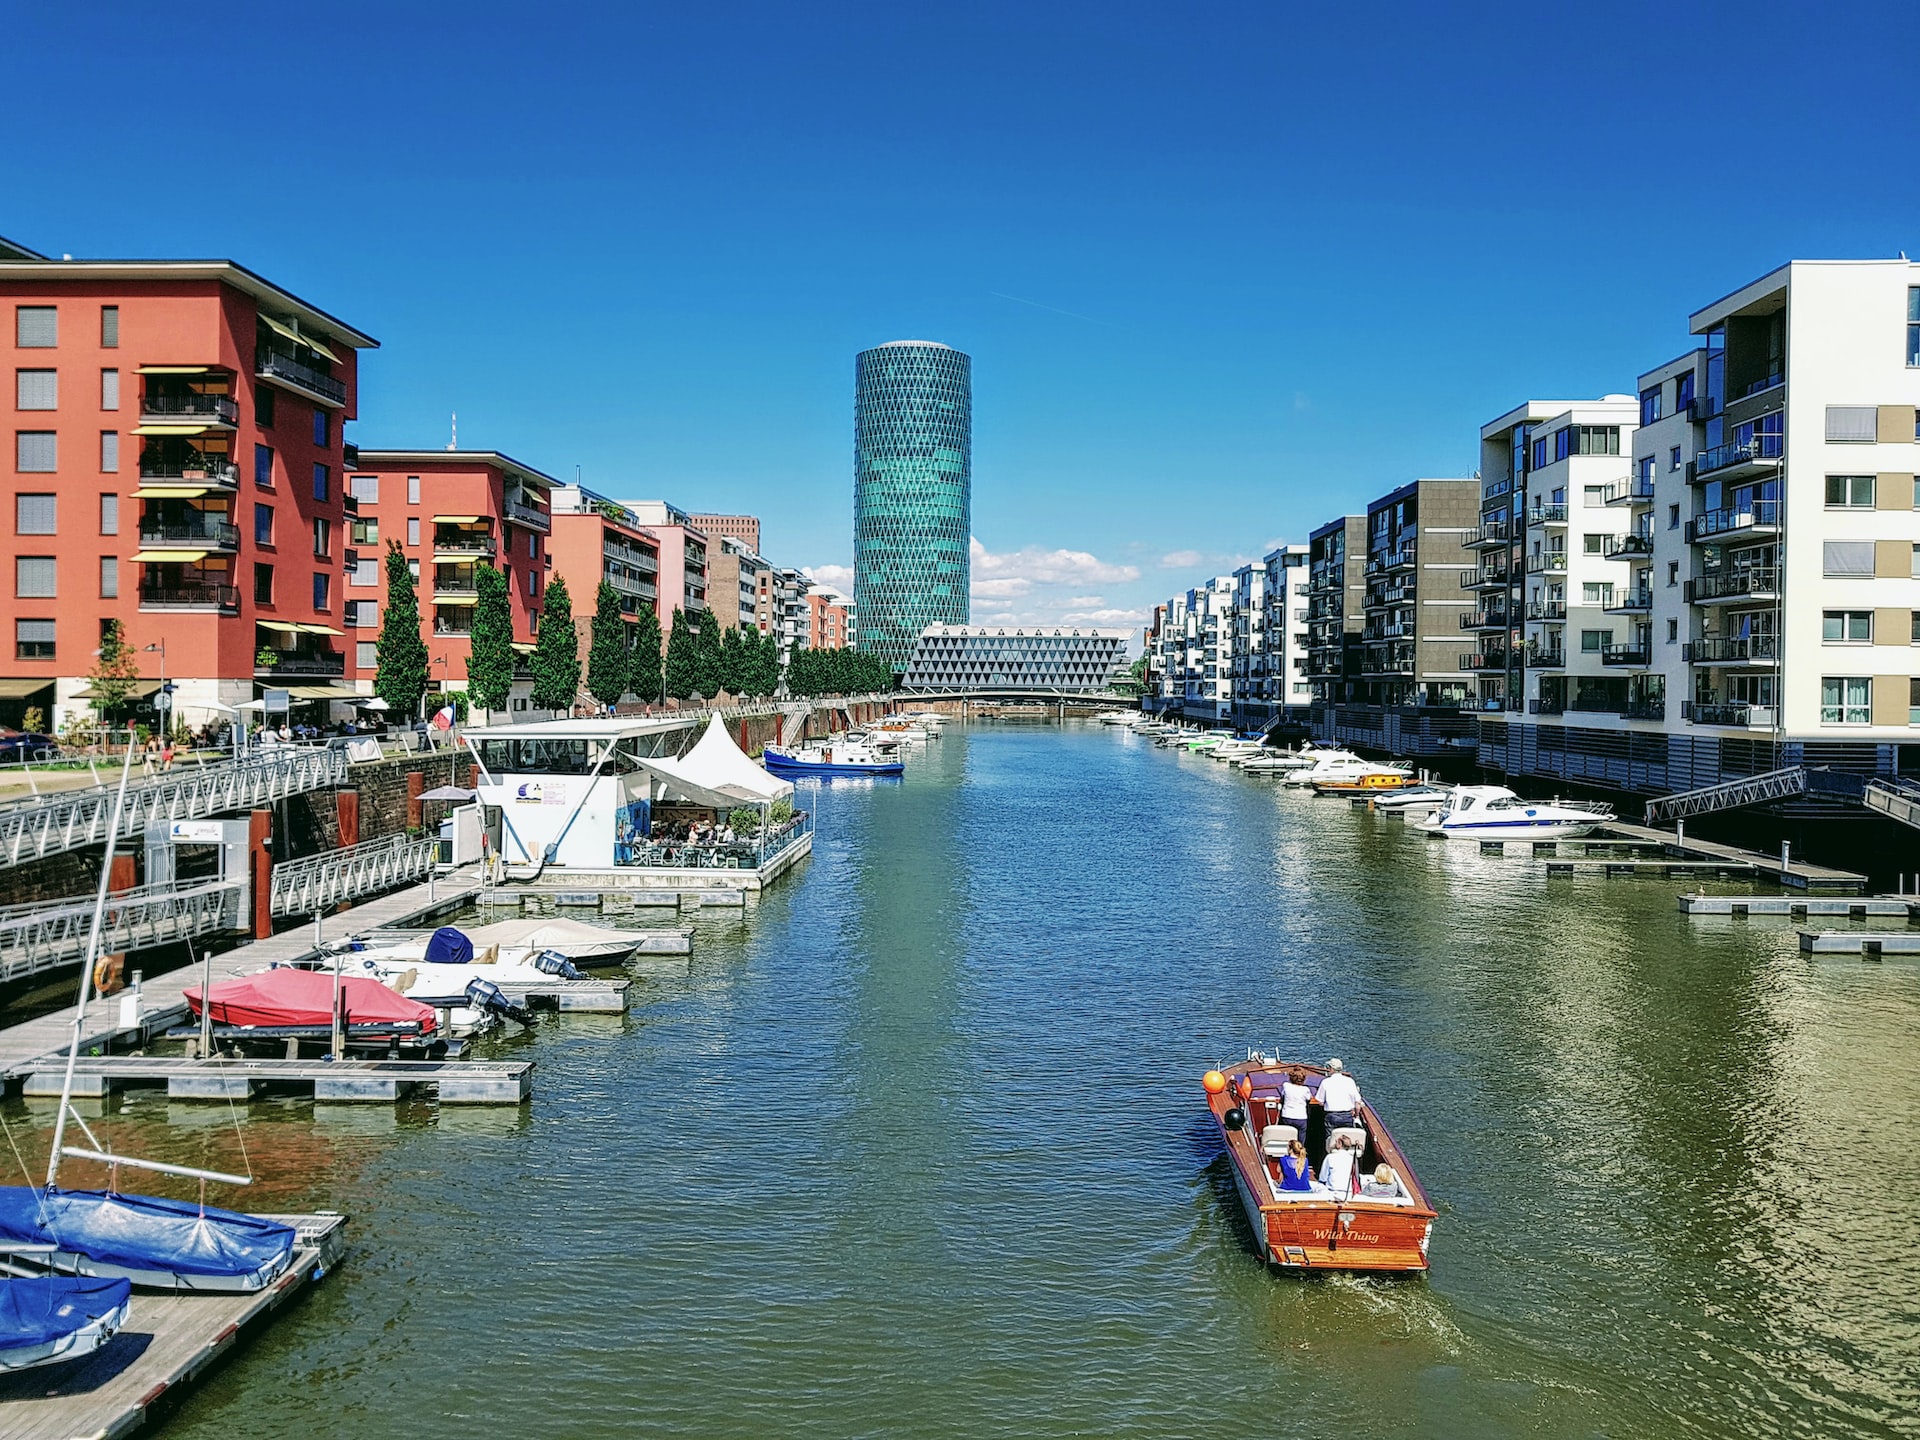 Sandwiched between the Main River and the Central Station, up-and-coming Gutleutviertel is one of the best districts to stay in Frankfurt if you're looking for a hip and modern area with bars and restaurants.